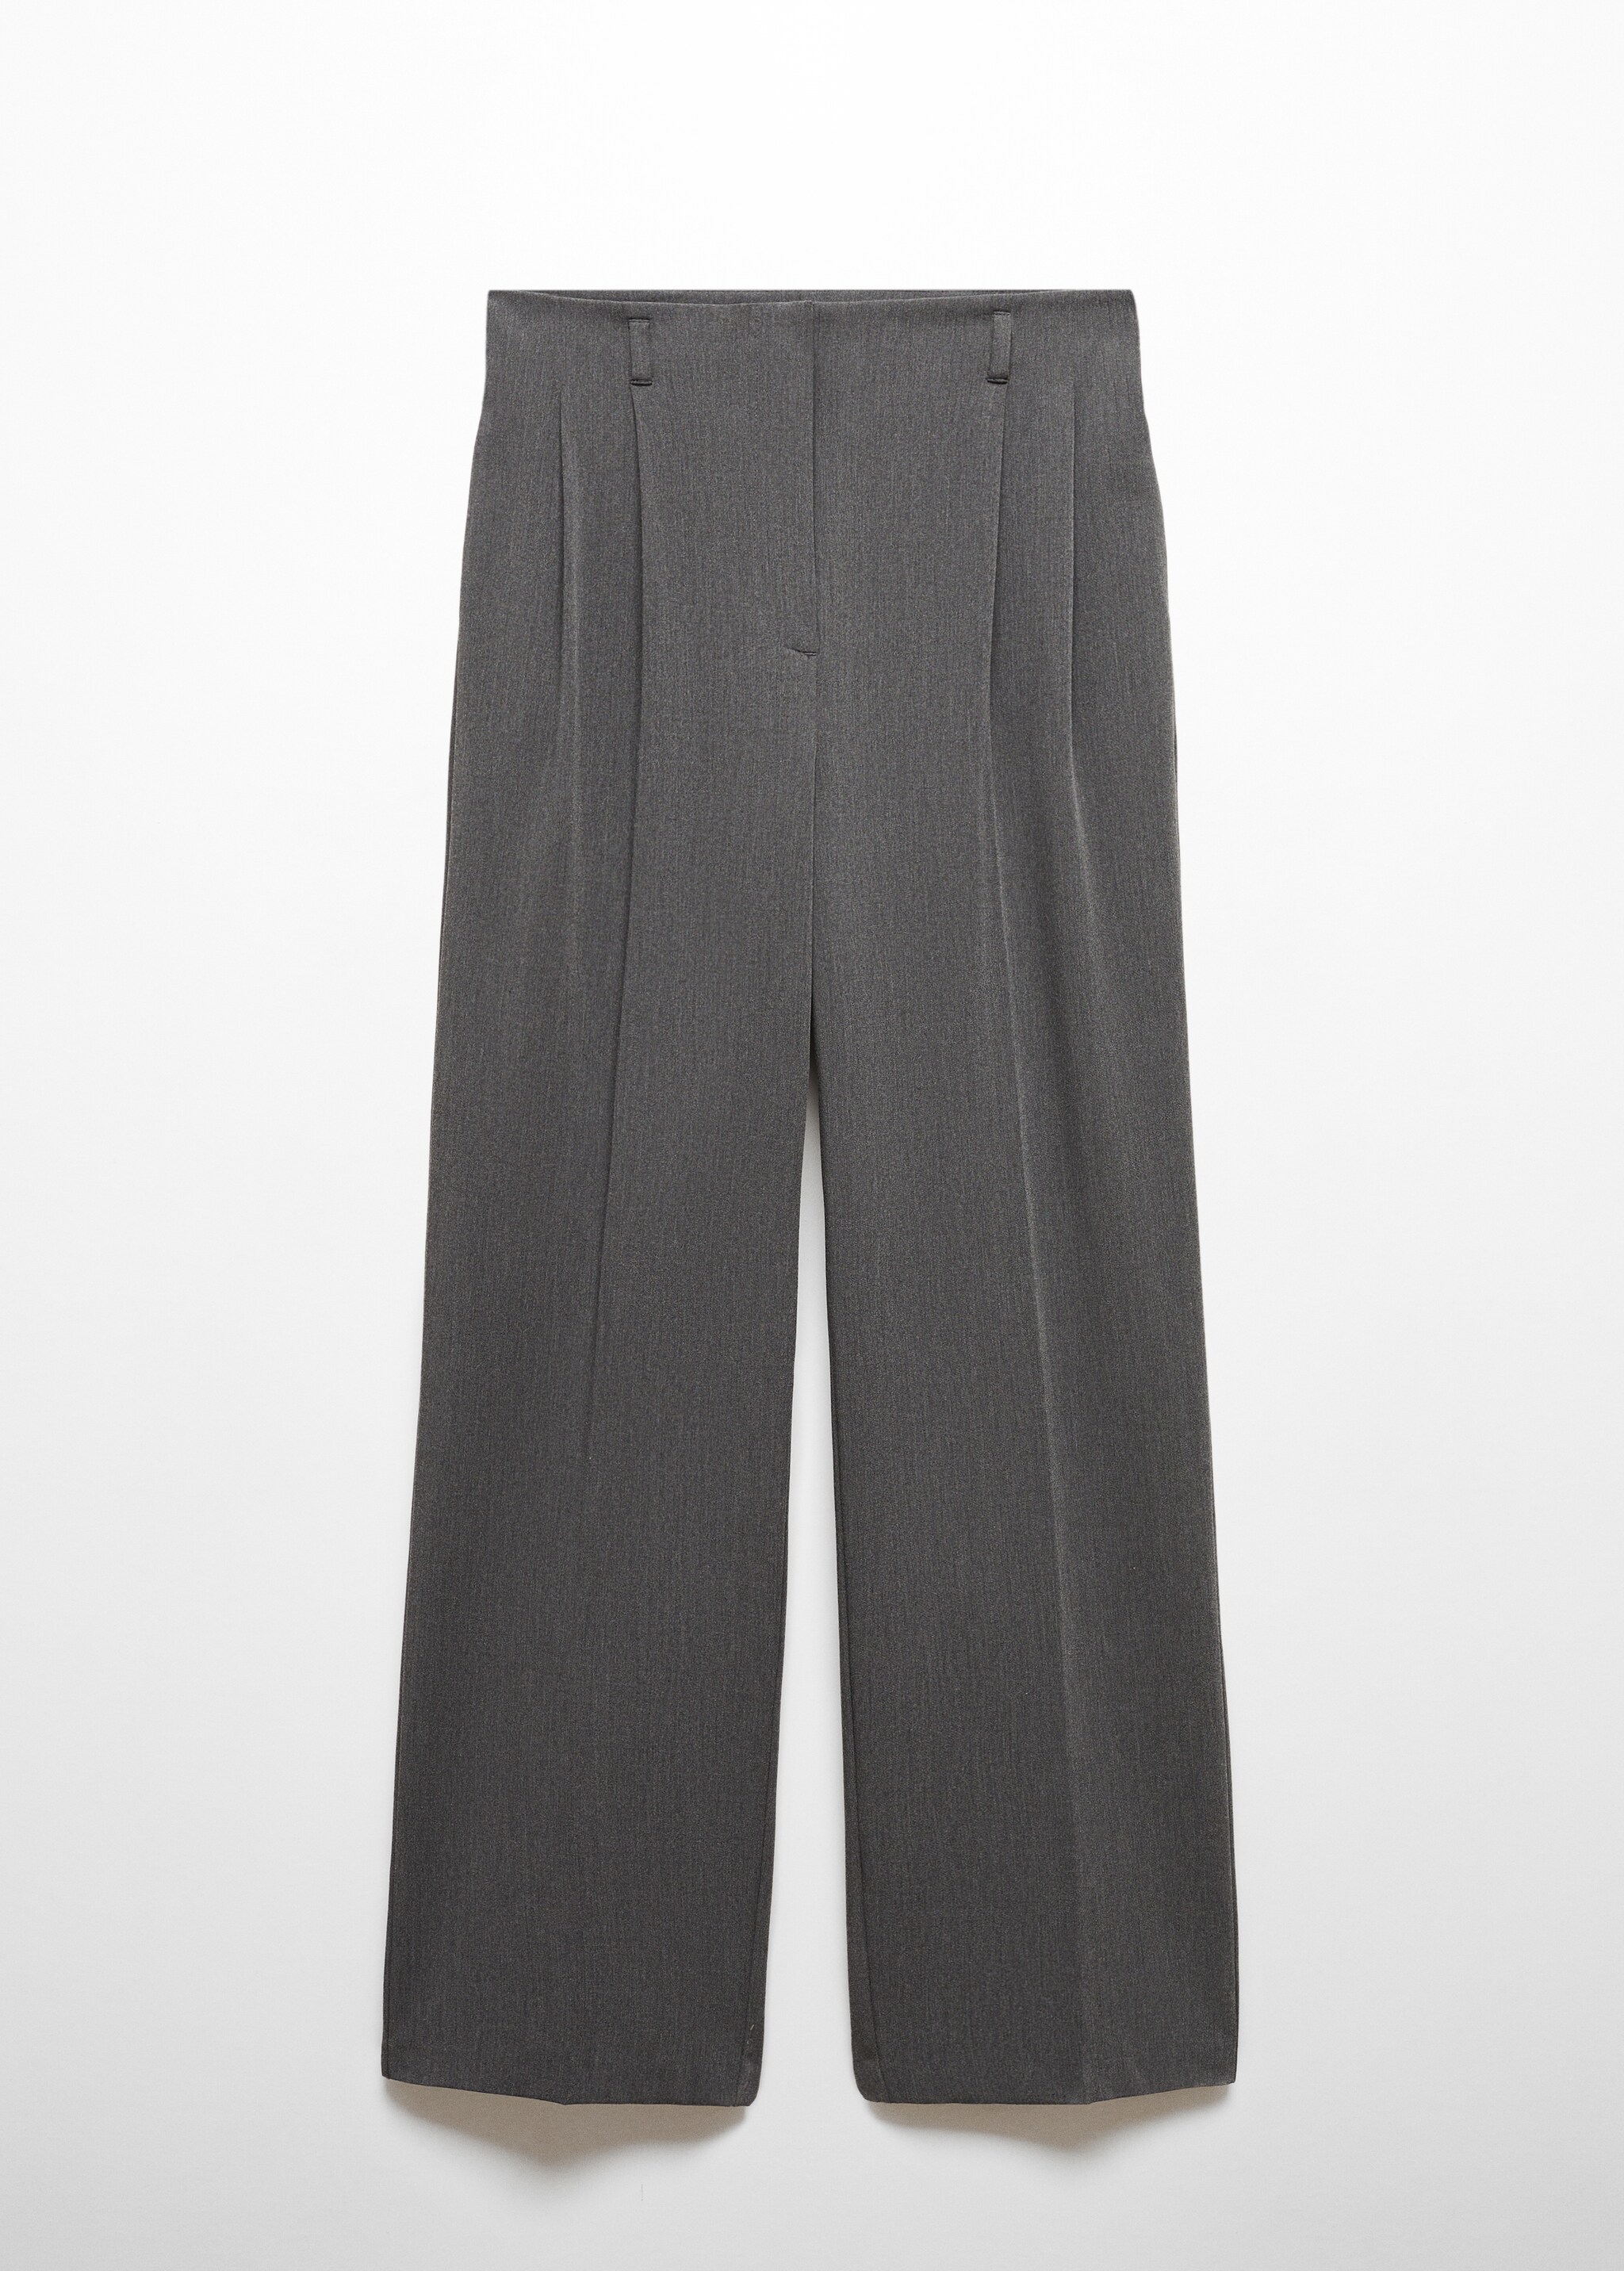 Wideleg pleated pants - Article without model